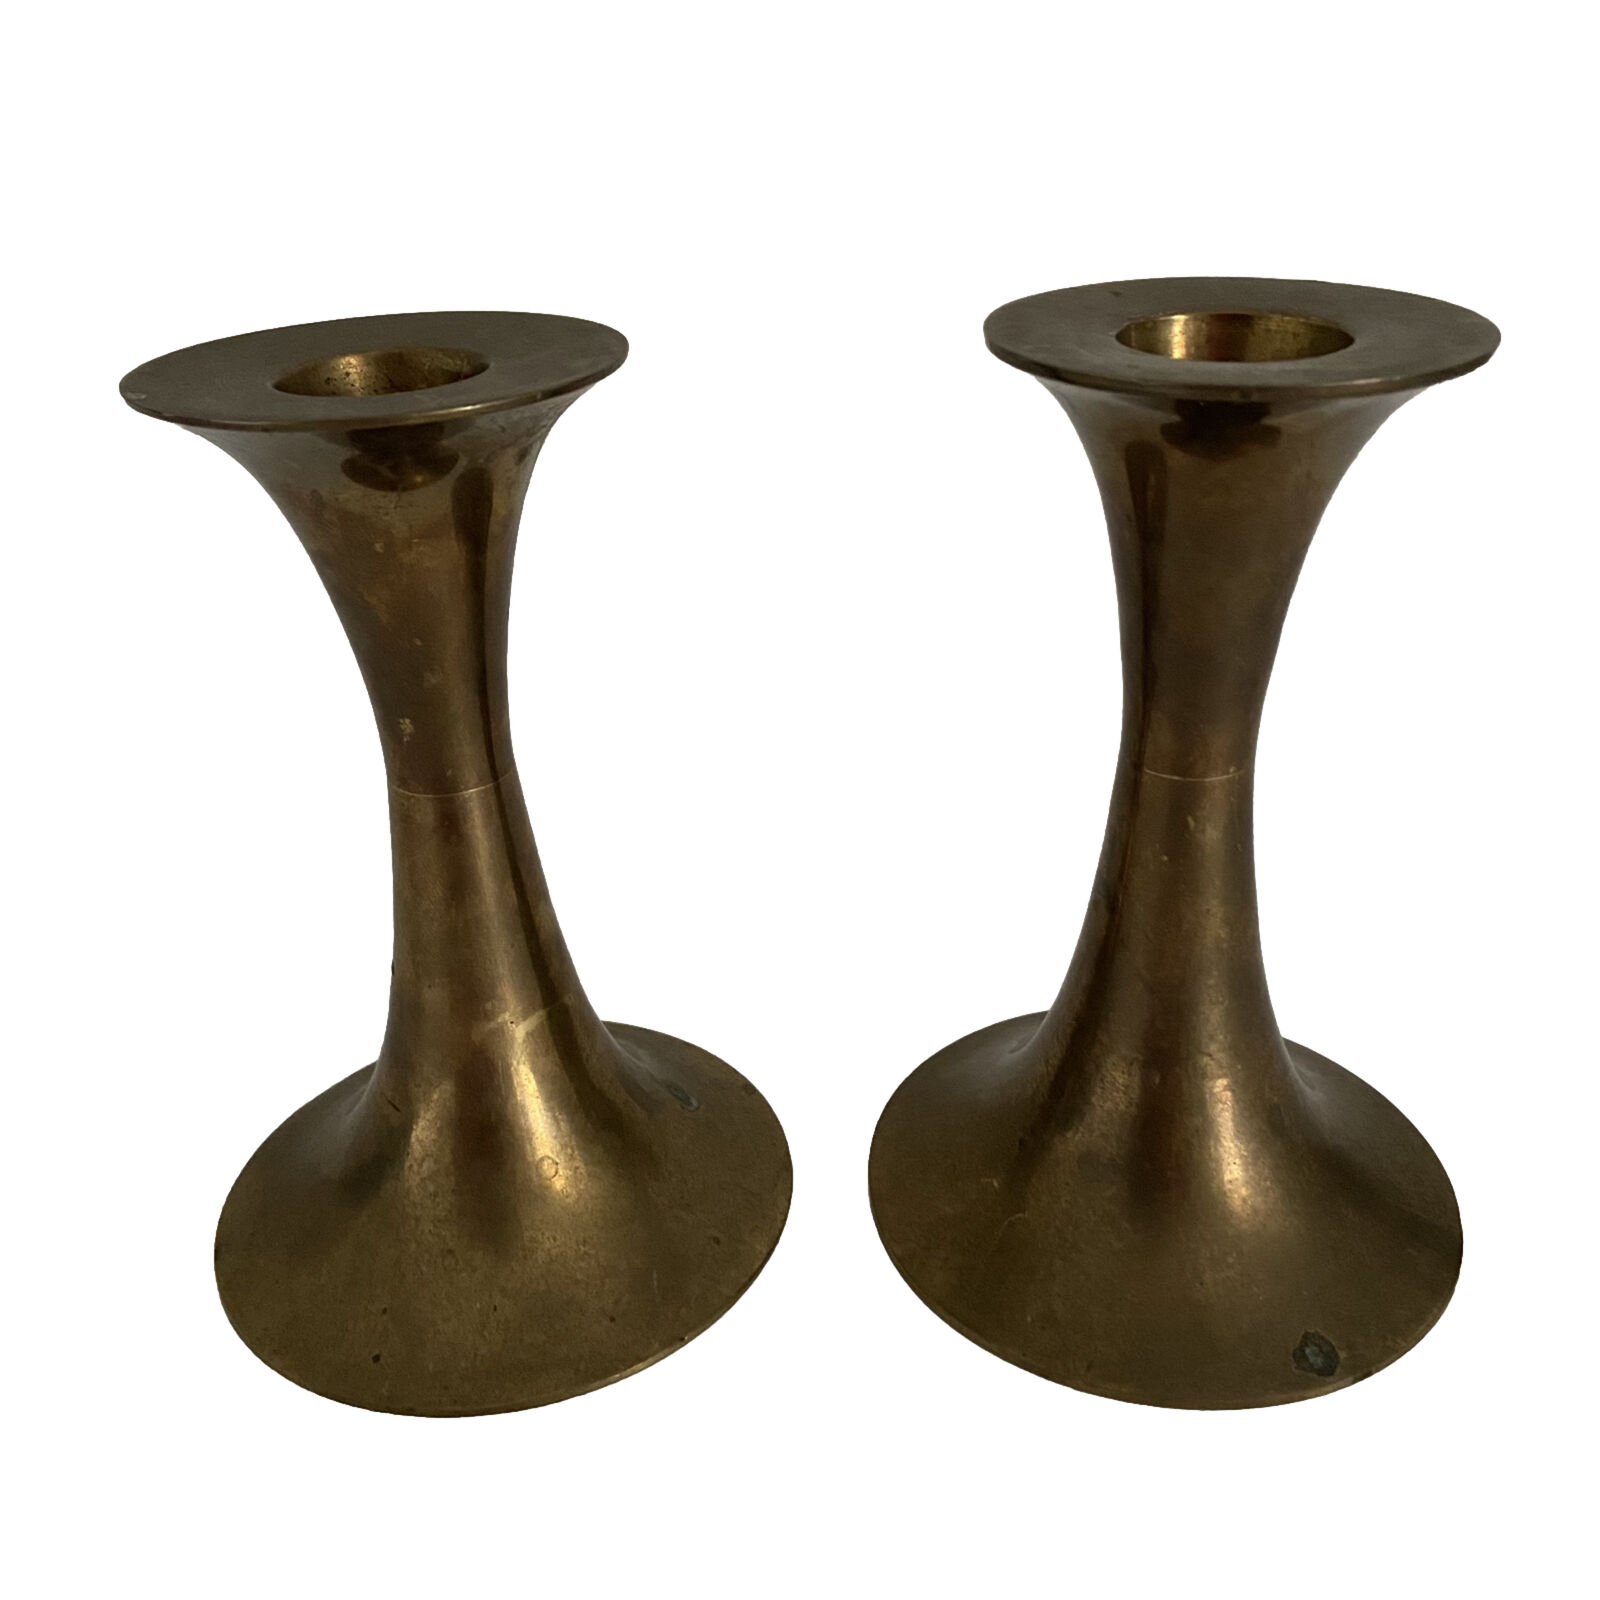 Vintage Brass Low Candlestick Holders Decor Made in India  5”  Set of 2 